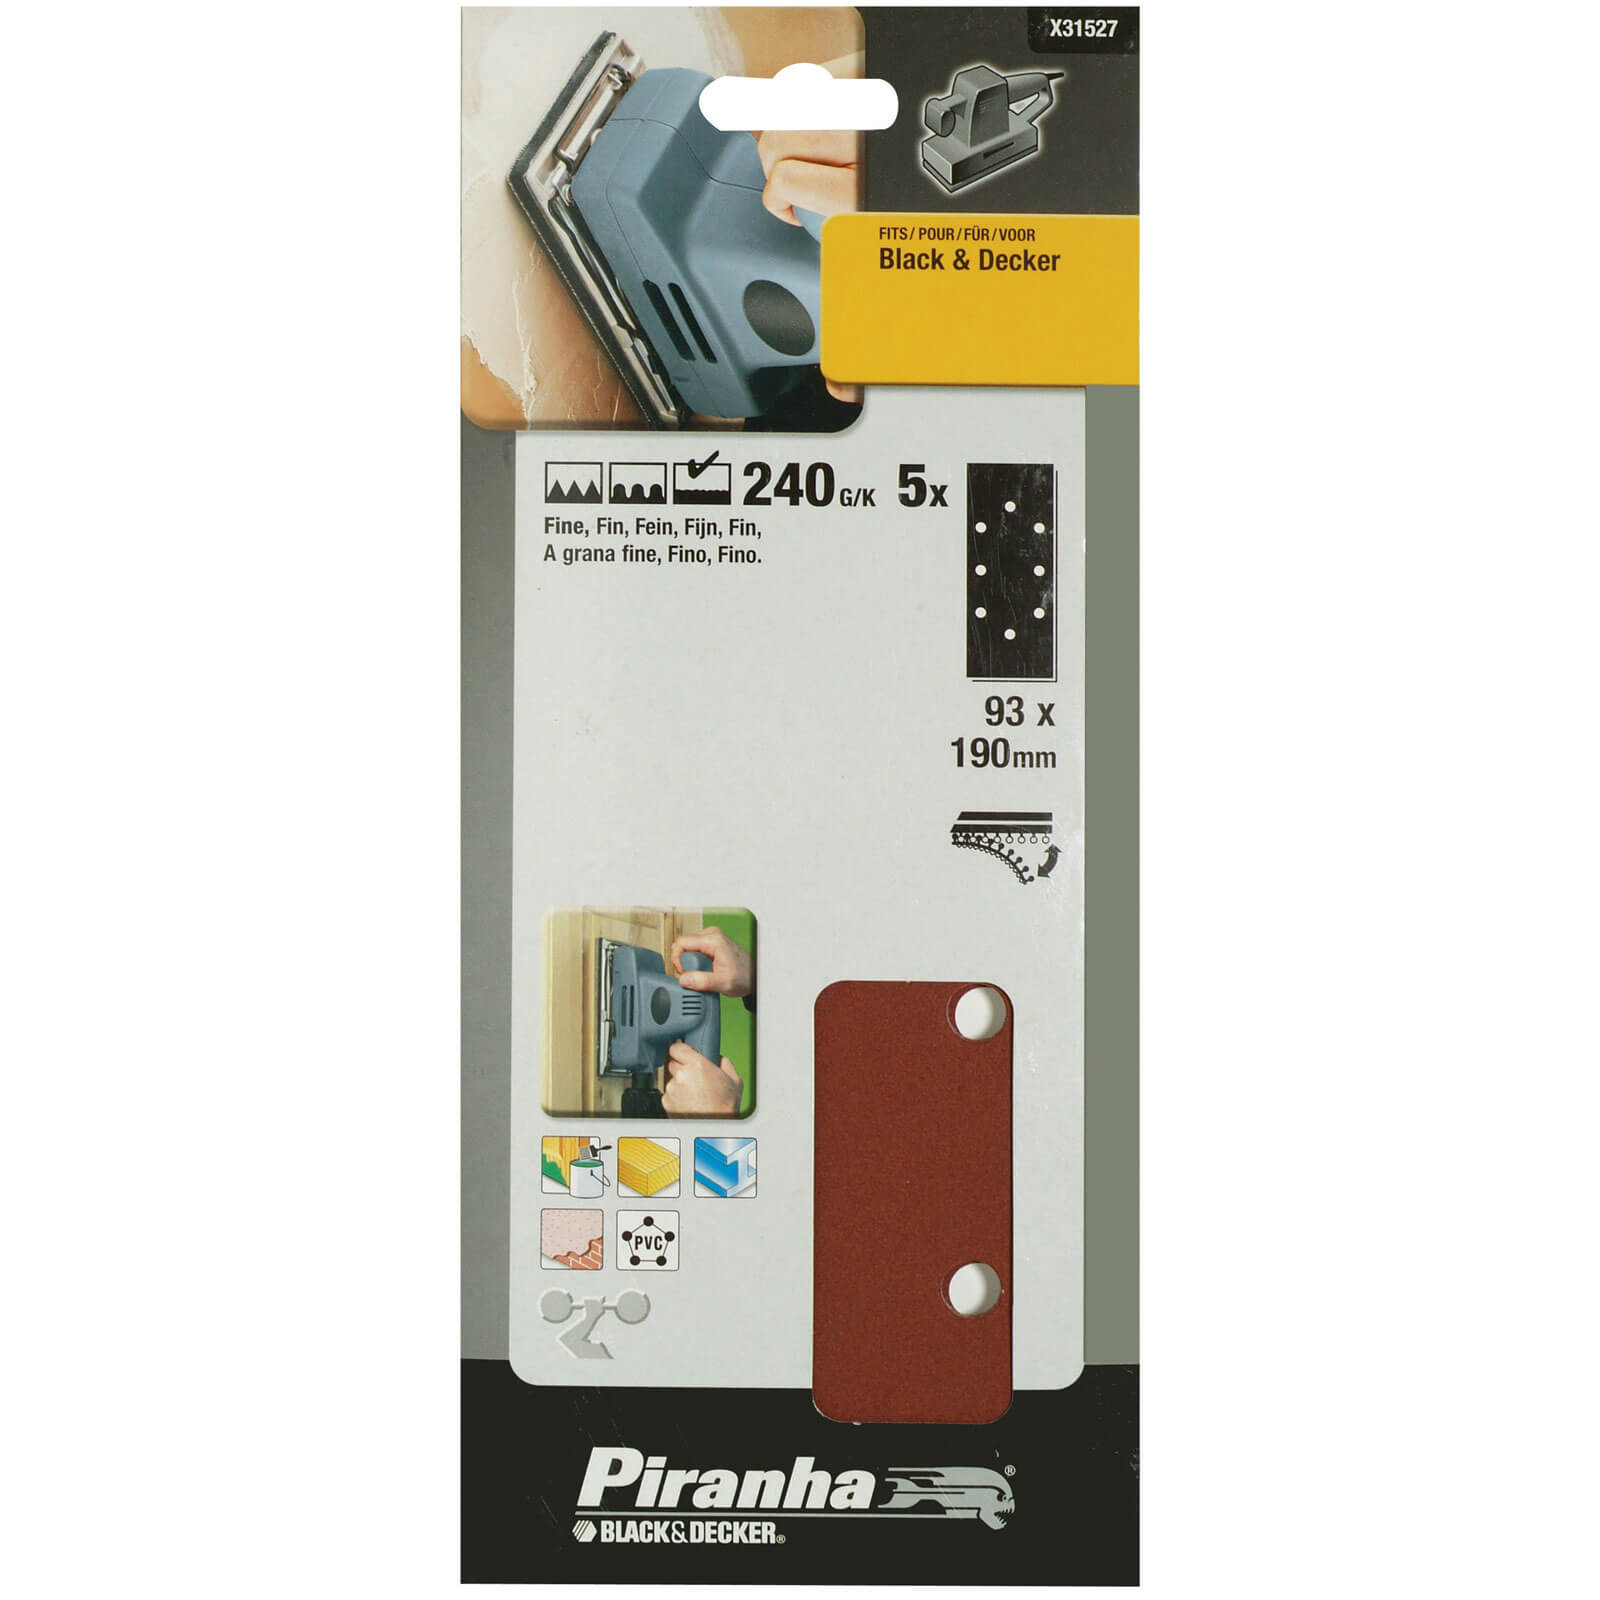 Image of Black and Decker Piranha Quick Fit Punched 1/3 Sanding Sheets 240g Pack of 5